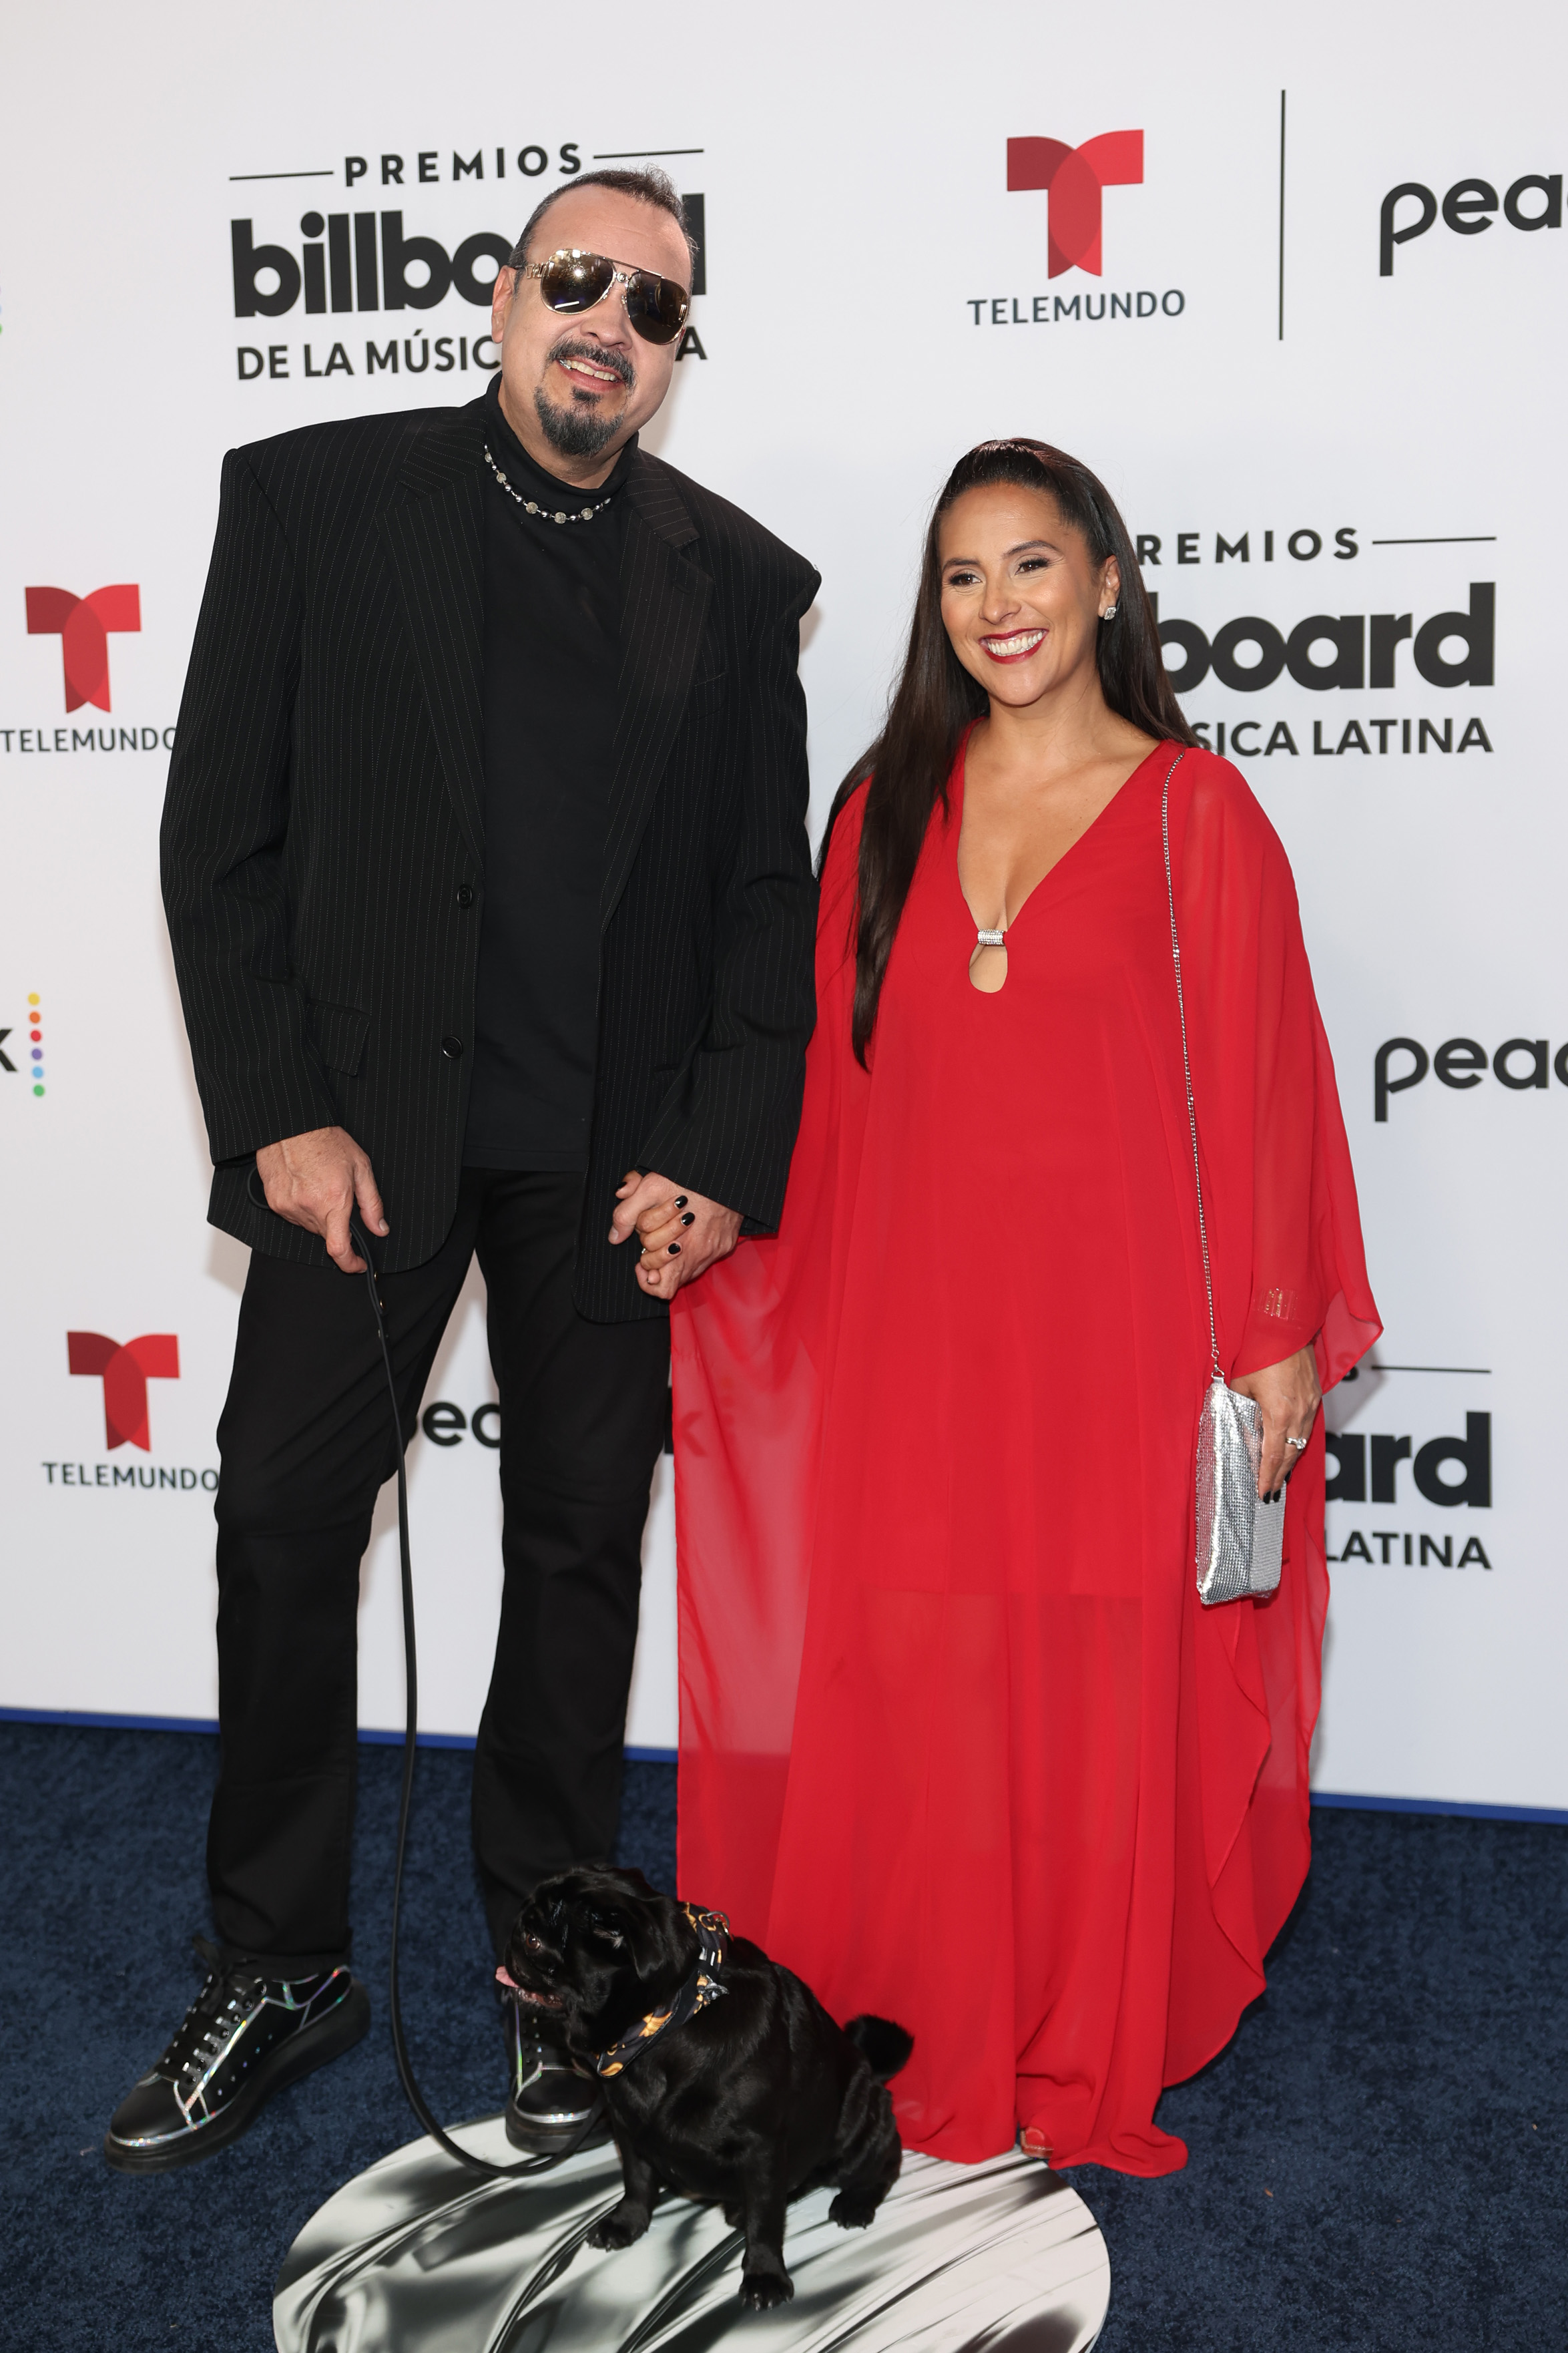 Pepe Aguilar and Aneliz Álvarez Alcalá attend the 2023 Billboard Latin Music Awards at Watsco Center on October 5, 2023, in Coral Gables, Florida. | Source: Getty Images